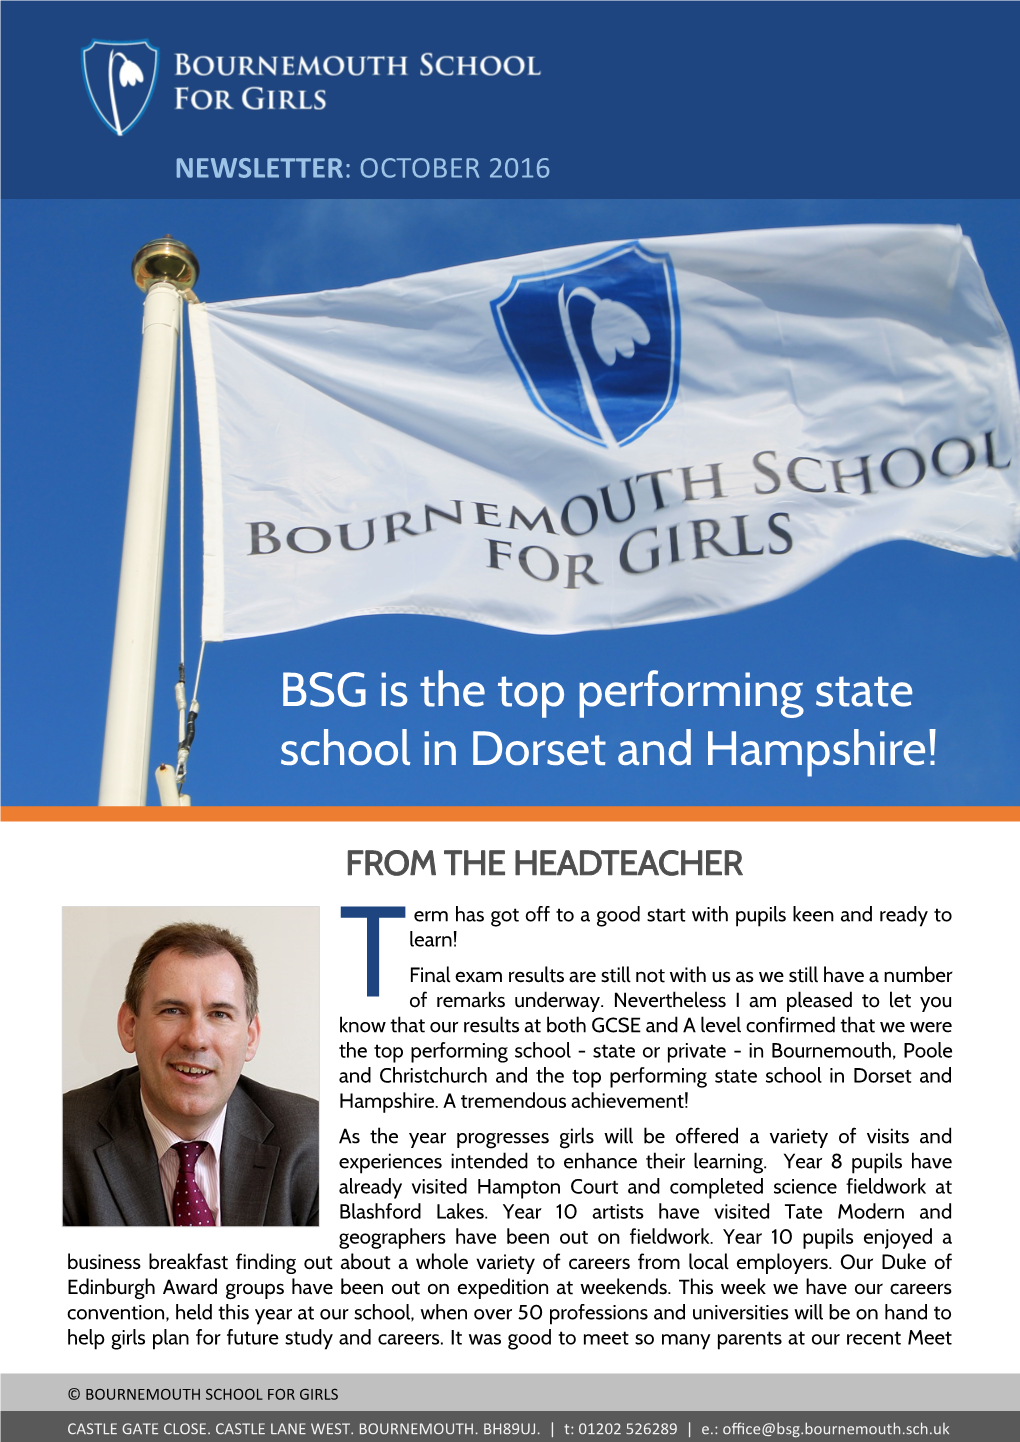 BSG Is the Top Performing State School in Dorset and Hampshire!